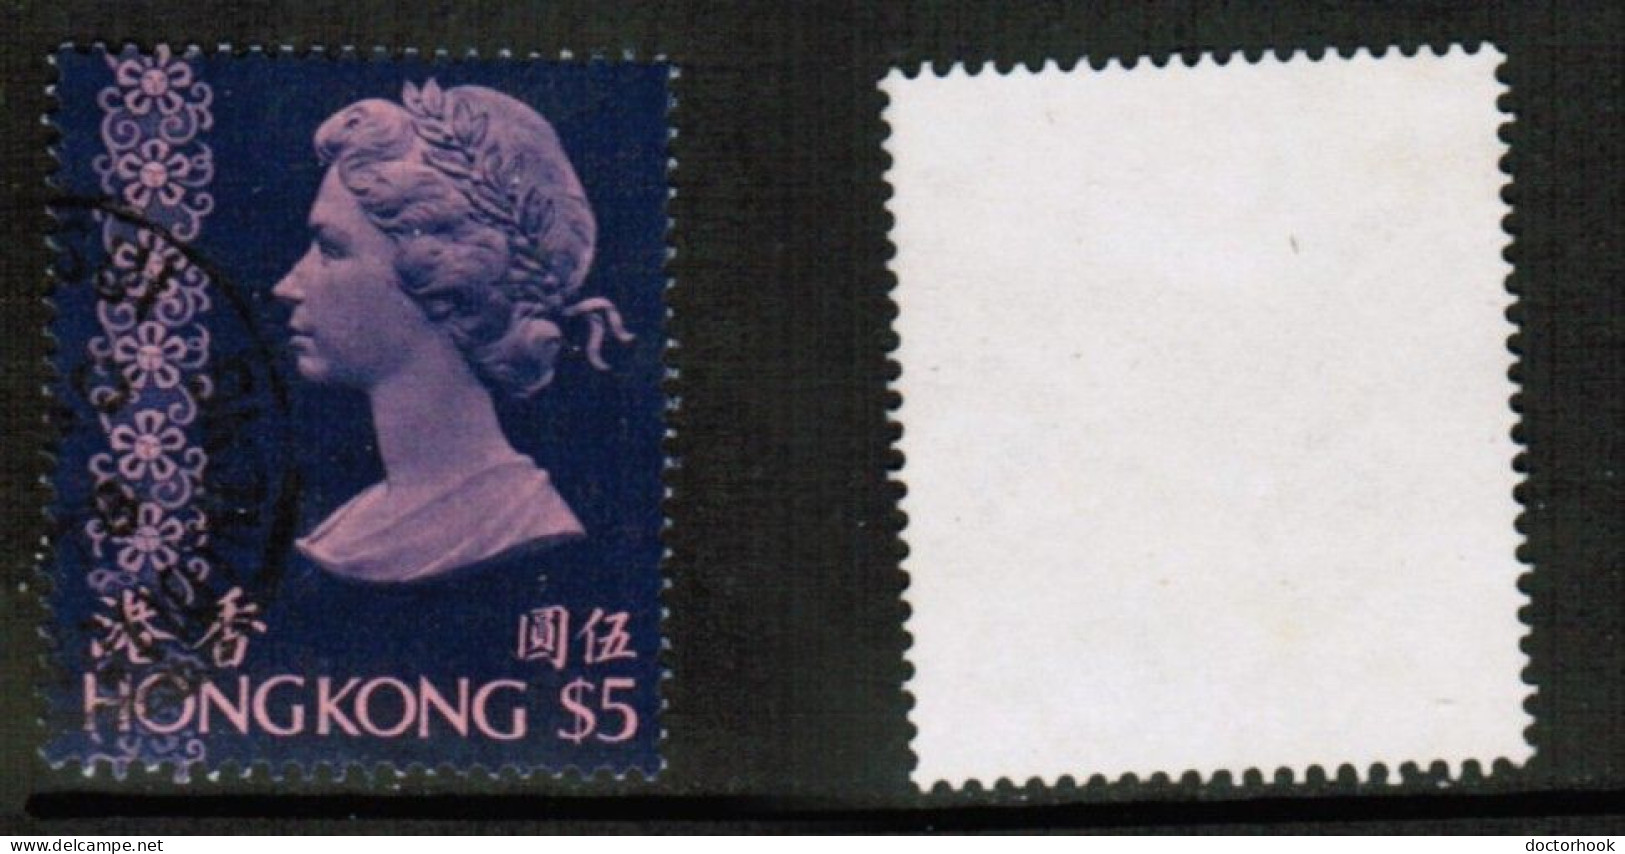 HONG KONG   Scott # 286a USED (CONDITION AS PER SCAN) (Stamp Scan # 924-3) - Oblitérés